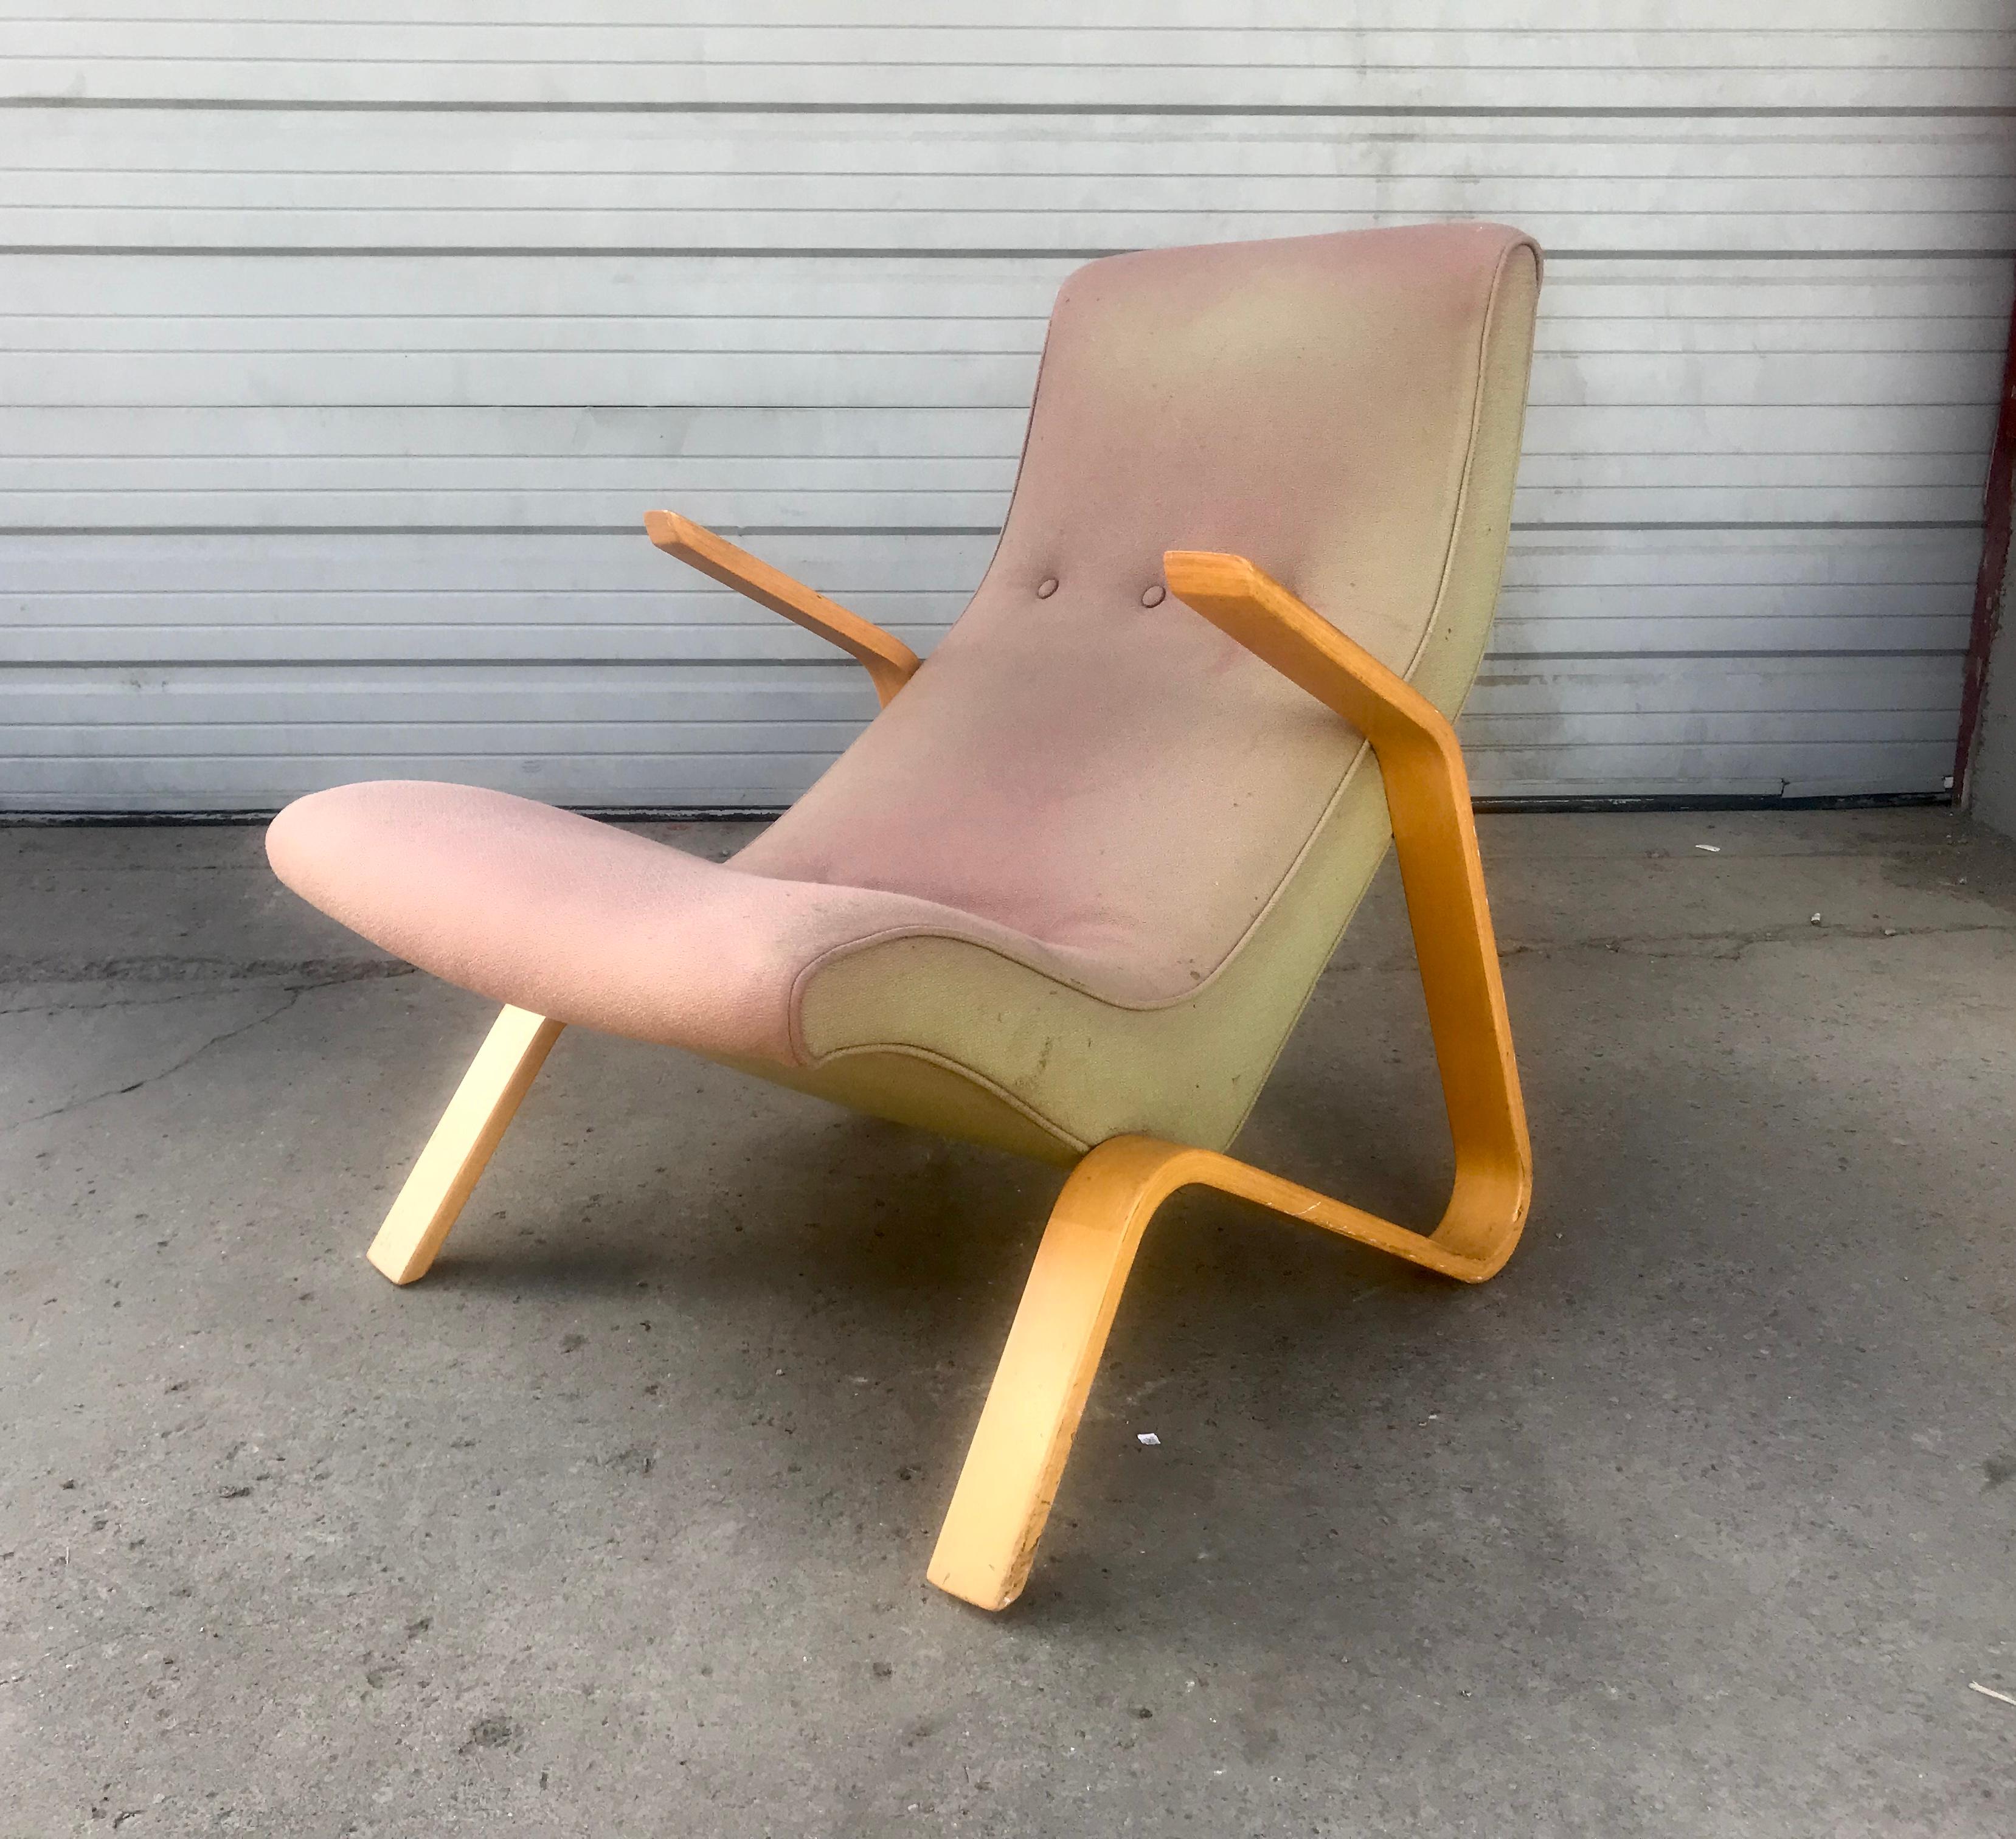 Original Saarinen grasshopper lounge chair manufactured by Knoll, chair retains original wool fabric upholstery, Usable but faded,,
At Cranbrook, Saarinen also met Florence Schust Knoll, who, as director of her husband Hans Knoll's eponymous